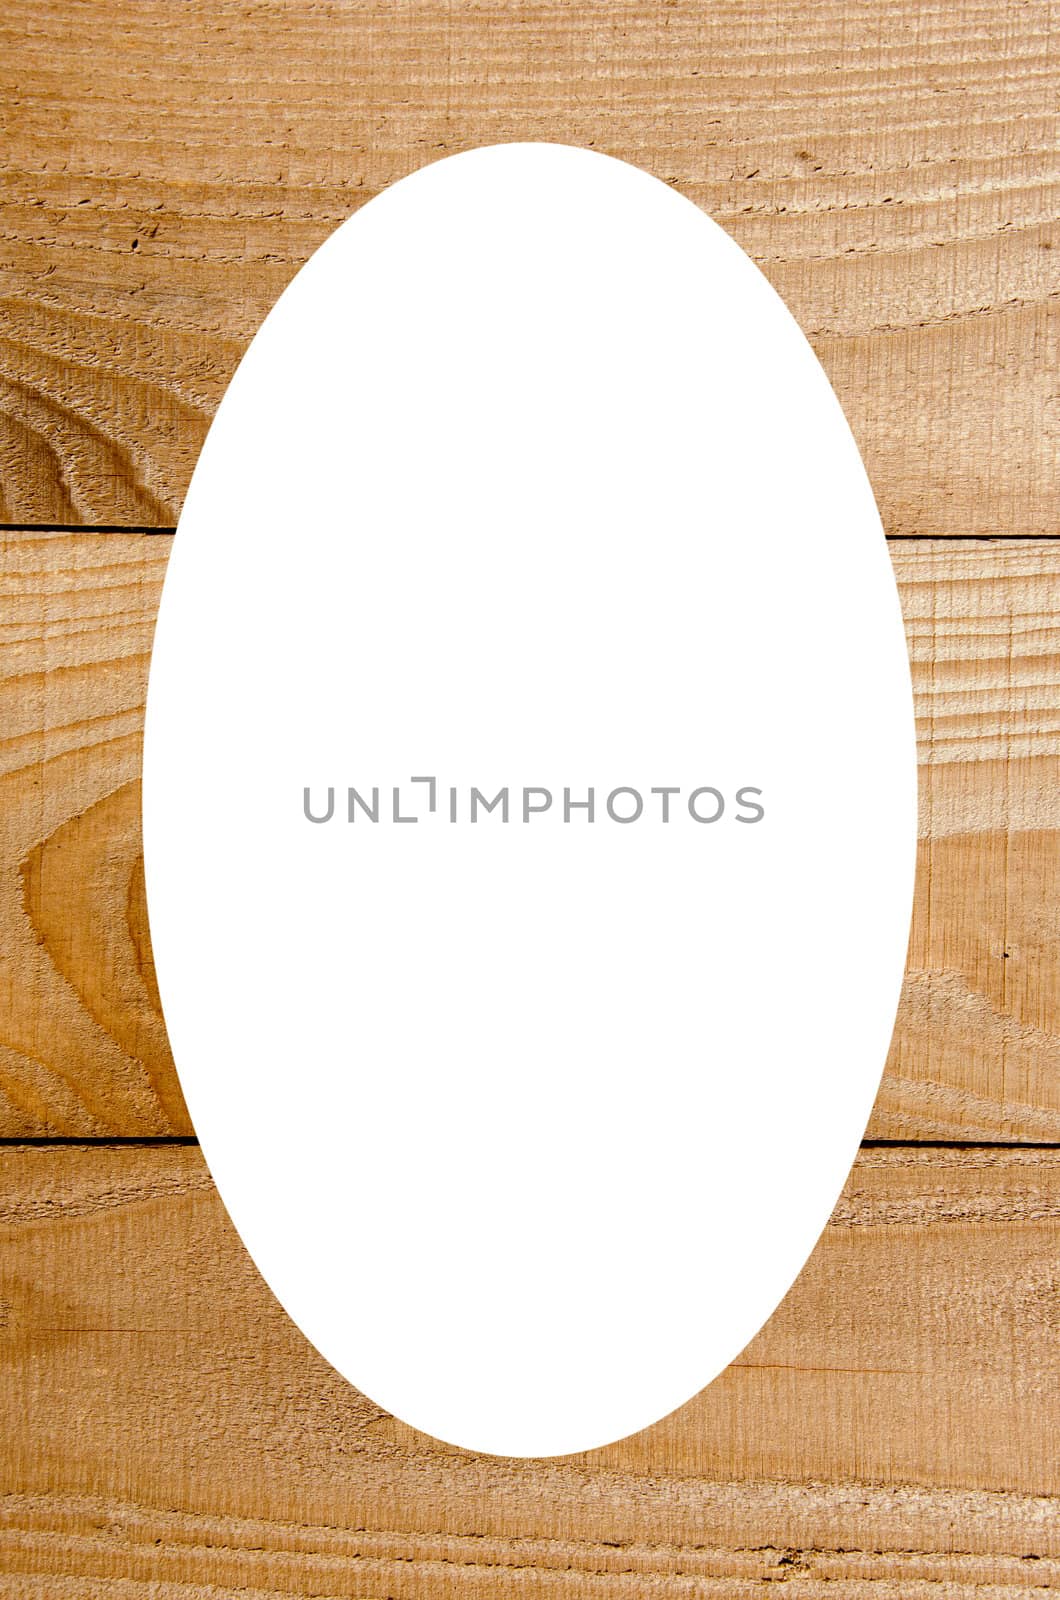 Wooden walls made of boards fragment. Simple architecture detail. Isolated white oval place for text photograph image in center of frame.